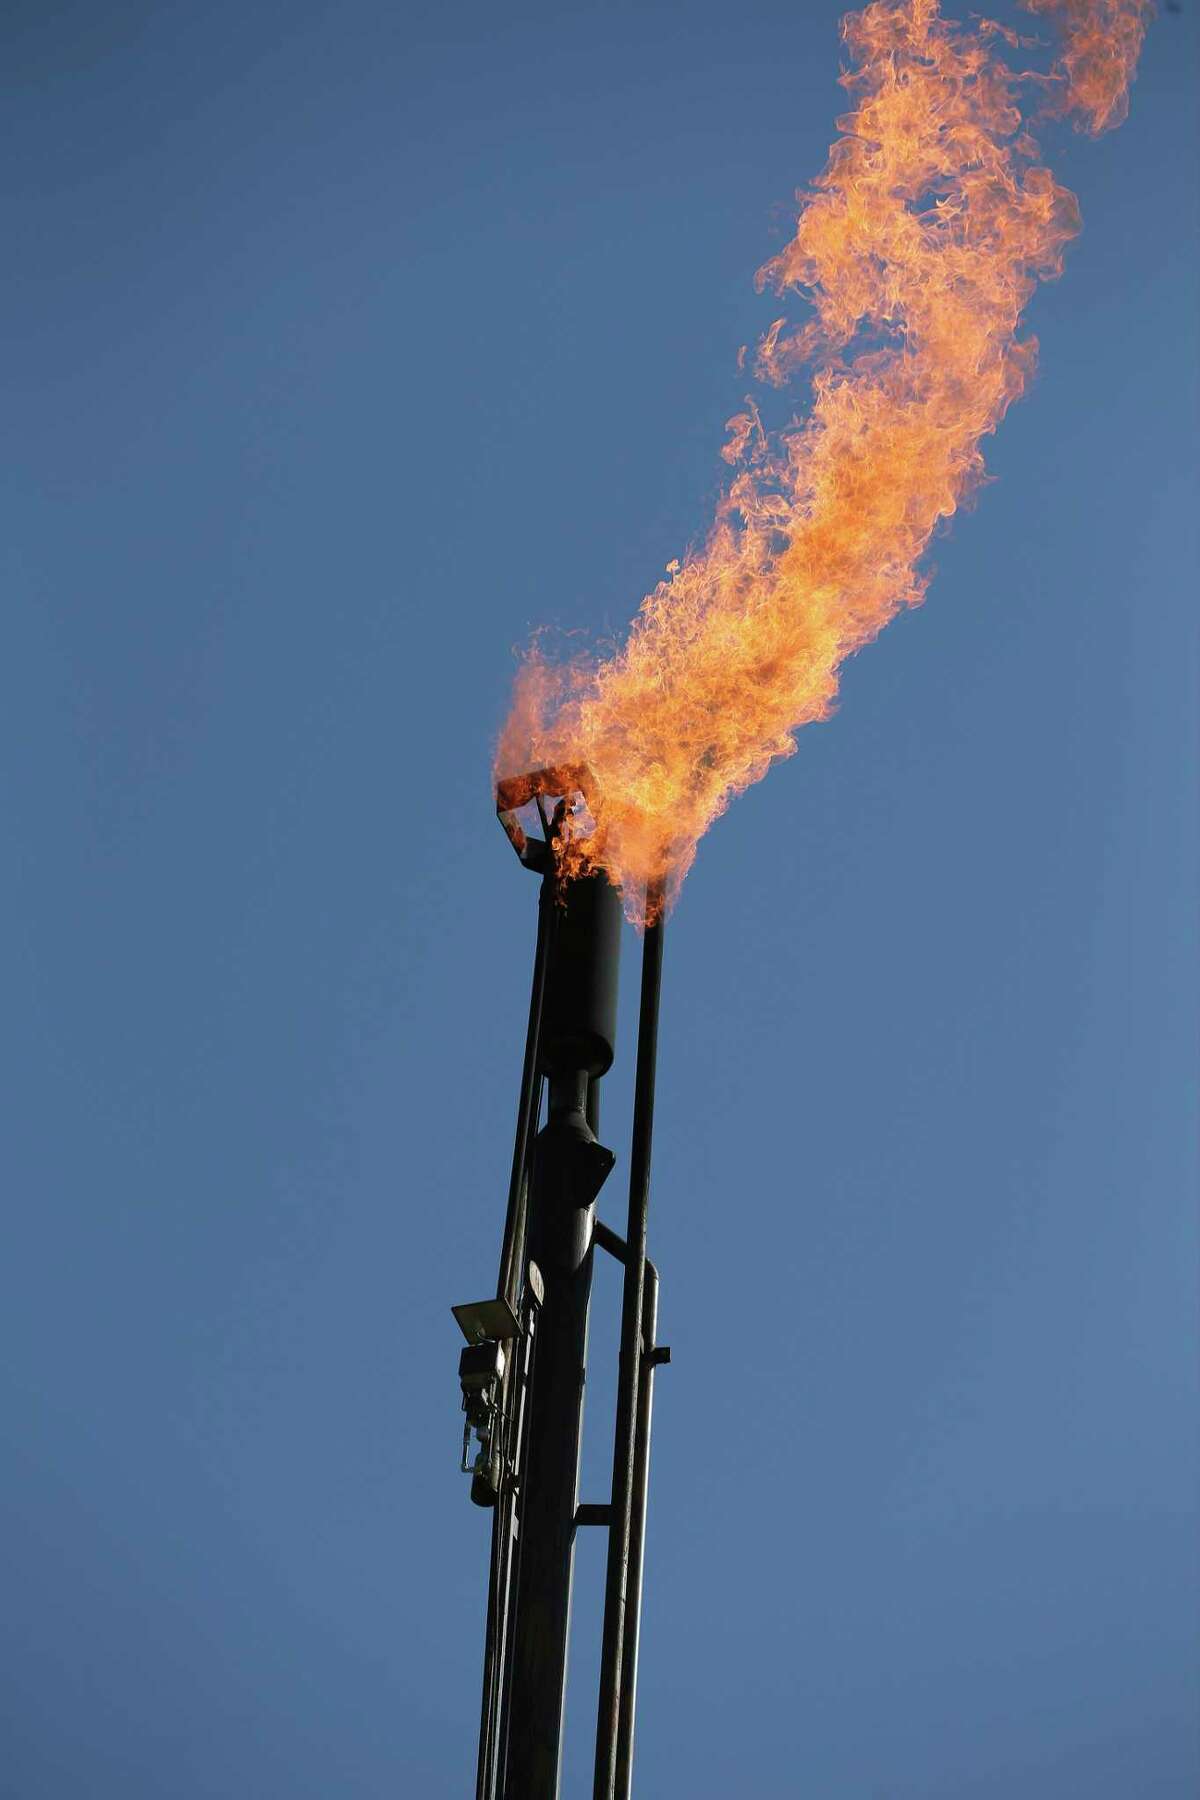 A flaring stack burns off natural gas at an oil extraction site operated by Recoil Resources near Poth, Texas on Monday, Apr. 13, 2020. Recoil Resources and other small oil producers are struggling and are facing a plan to cut production by 20 percent if approved by the Railroad Commission. The commission is scheduled to vote on the matter on Tuesday.